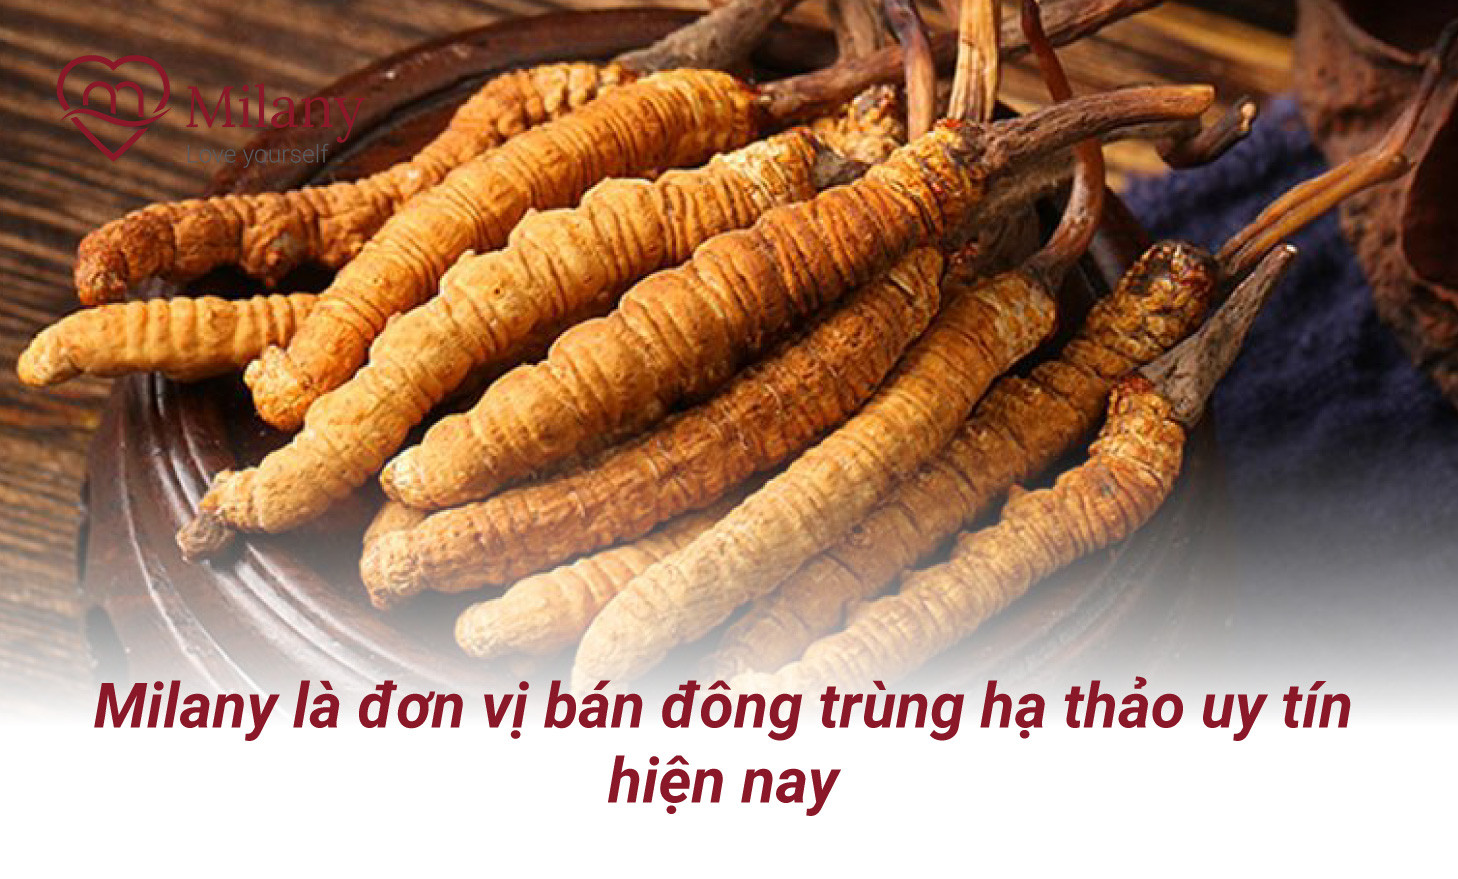 dong trung ha thao milany